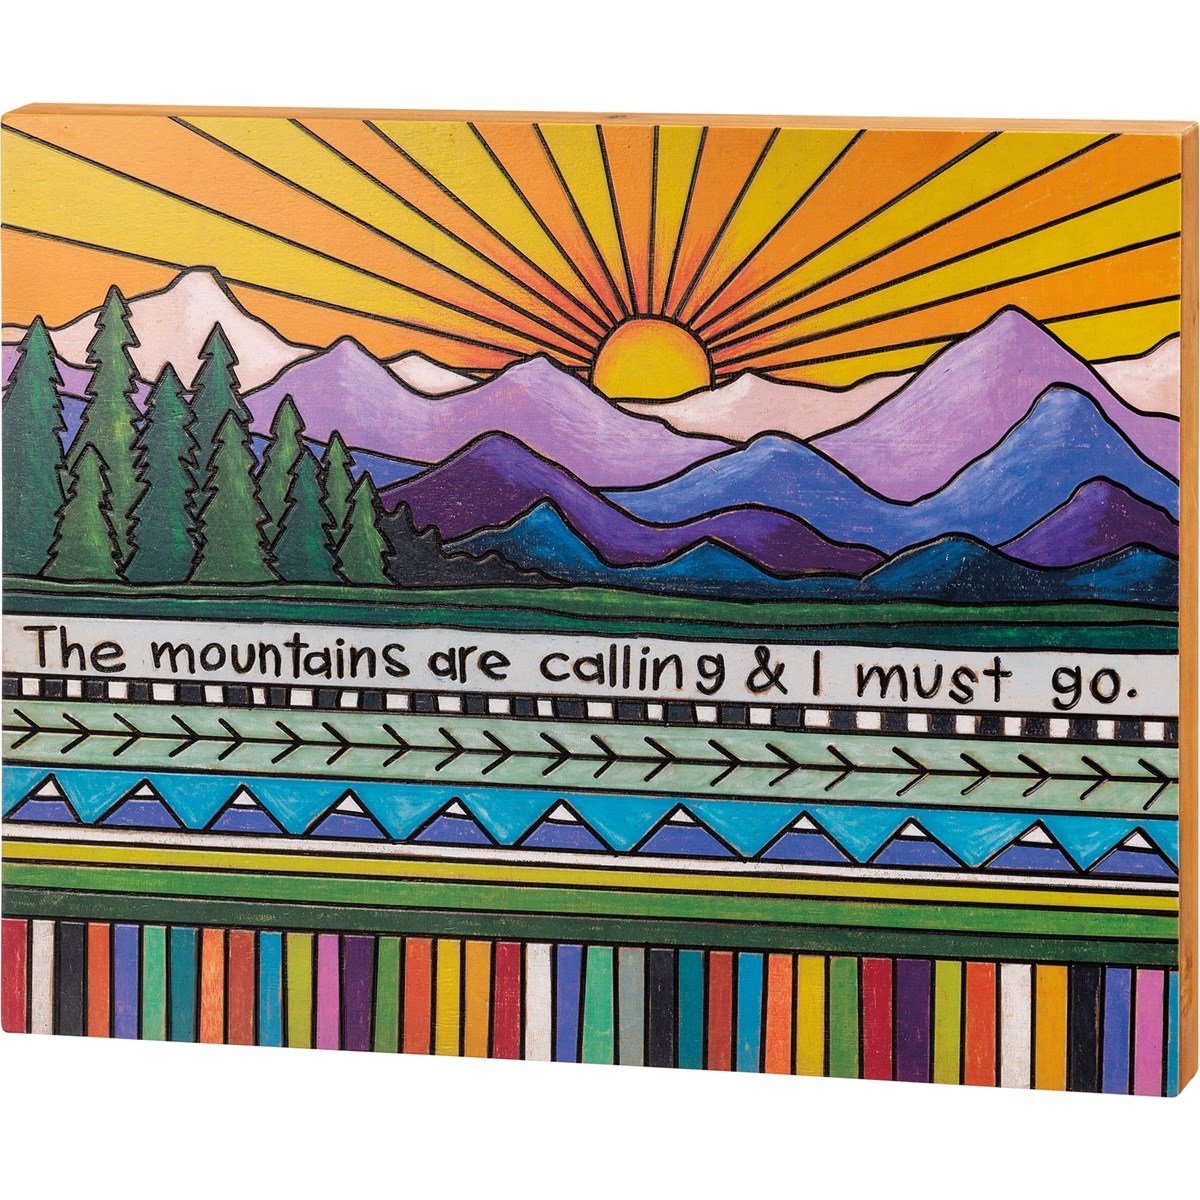 The Mountains Are Calling & I Must Go Box Sign - Wood